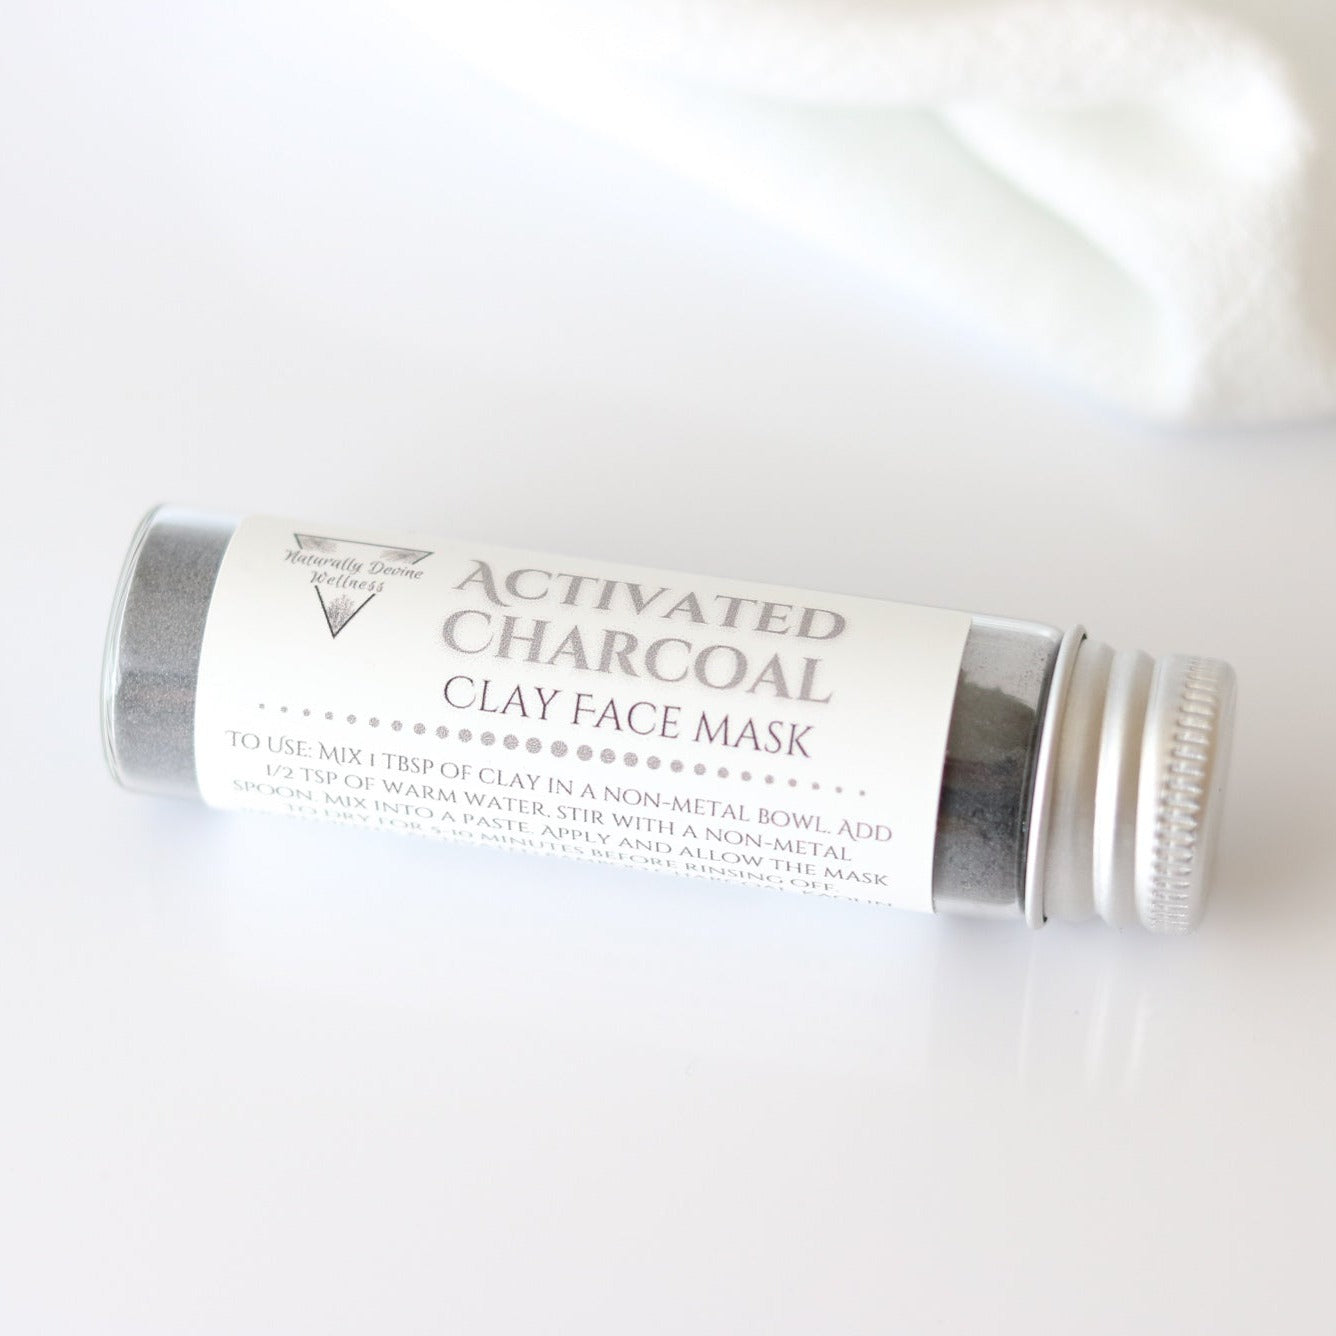 Activated Charcoal Clay Face Mask - Naturally Devine Wellness